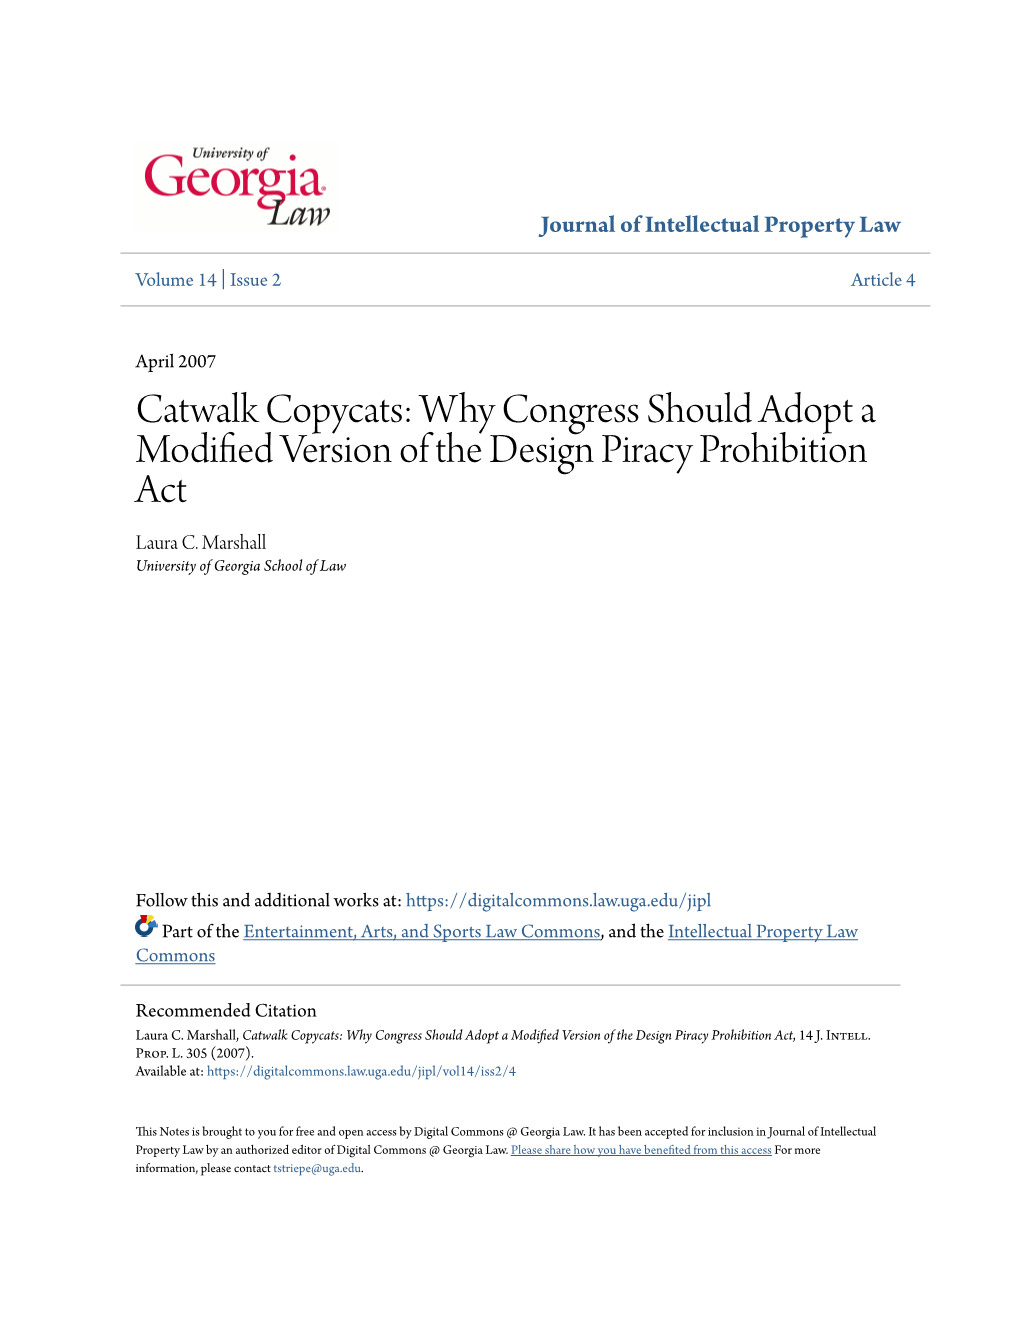 Catwalk Copycats: Why Congress Should Adopt a Modified Version of the Design Piracy Prohibition Act, 14 J